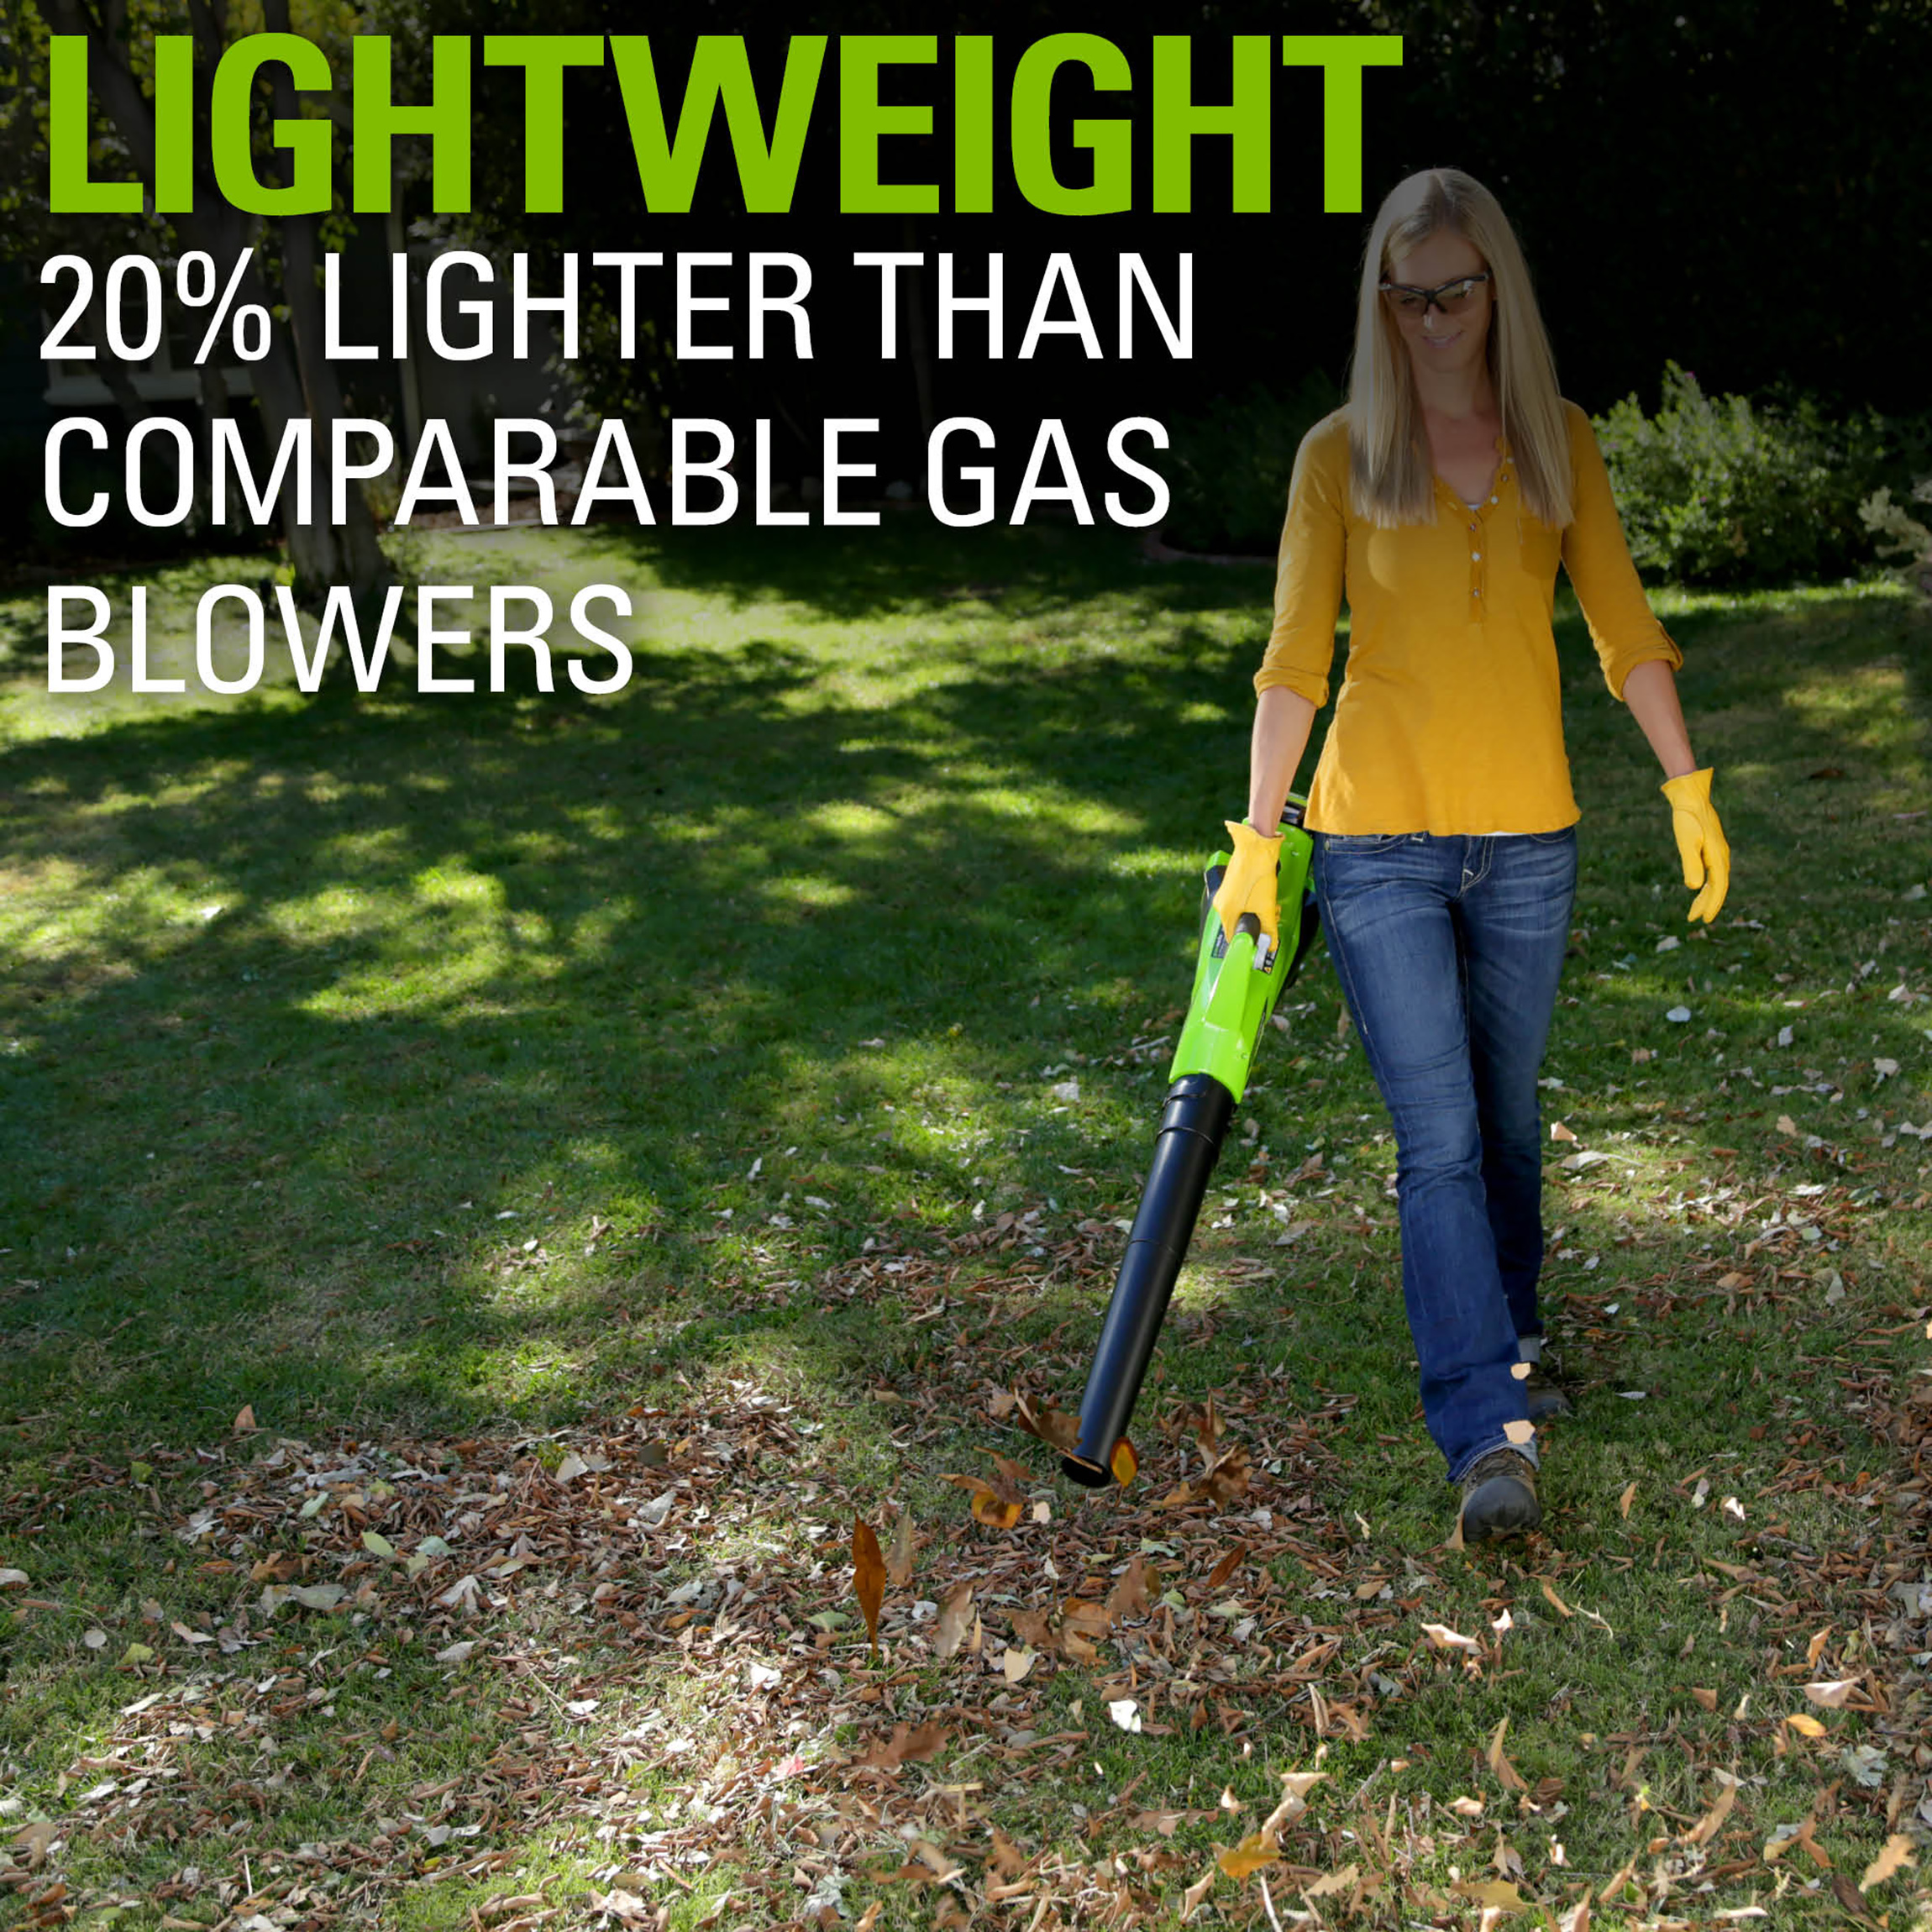 Greenworks 40V 390 CFM Cordless Leaf Blower with 2.5 Ah Battery and Charger， 2400802